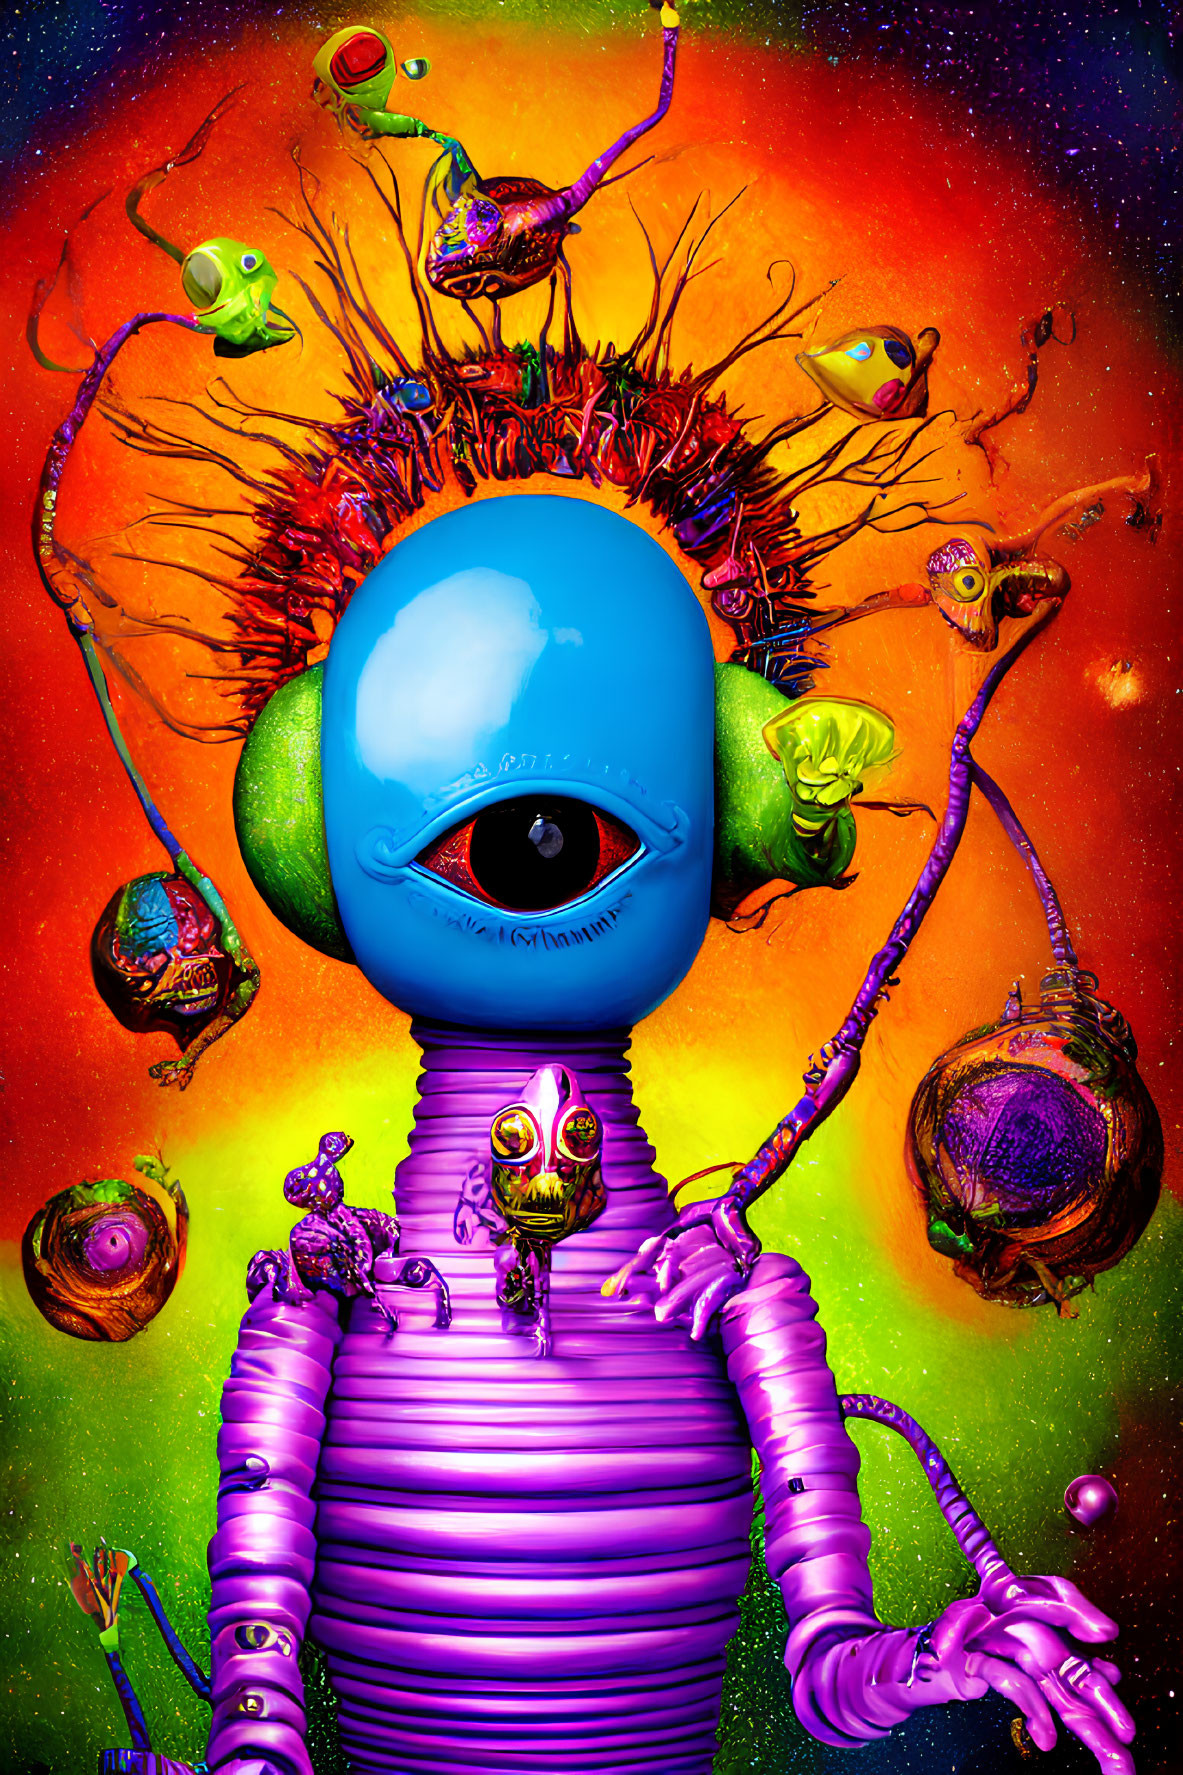 Colorful Psychedelic Illustration of Humanoid Figure with Large Eye and Alien Creatures